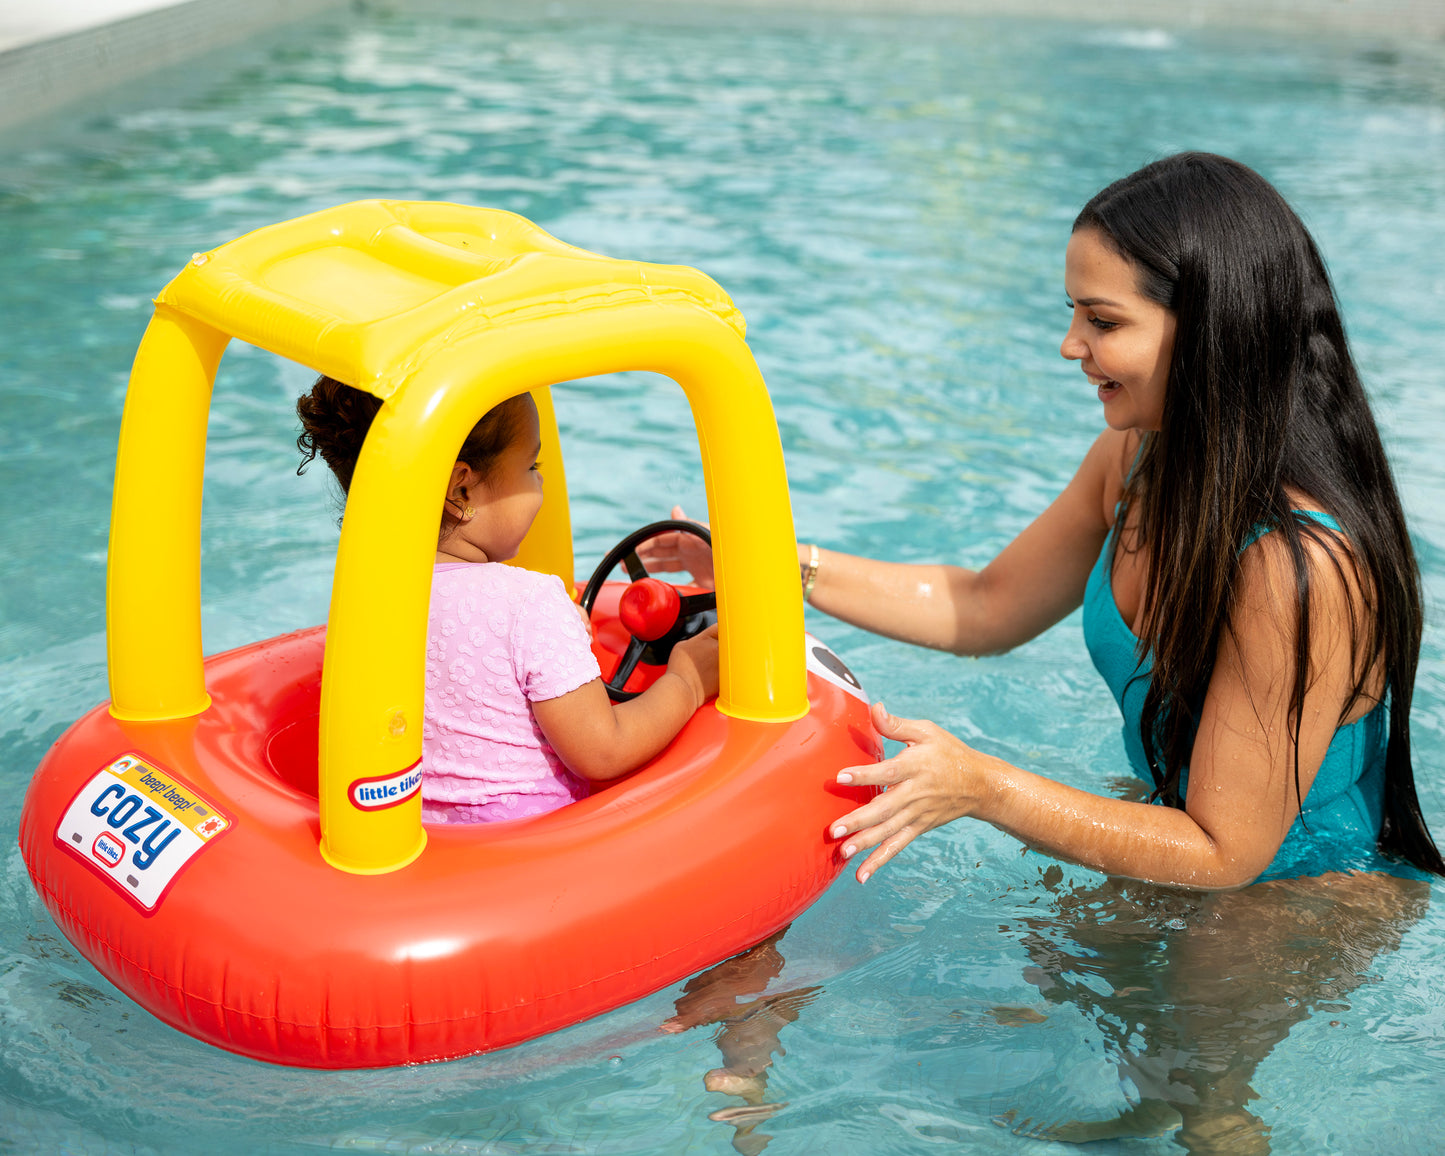 Little Tikes Cozy Coupe Junior Baby Boat - Infant Pool Float with Canopy, Safety Seat, and Steering Wheel